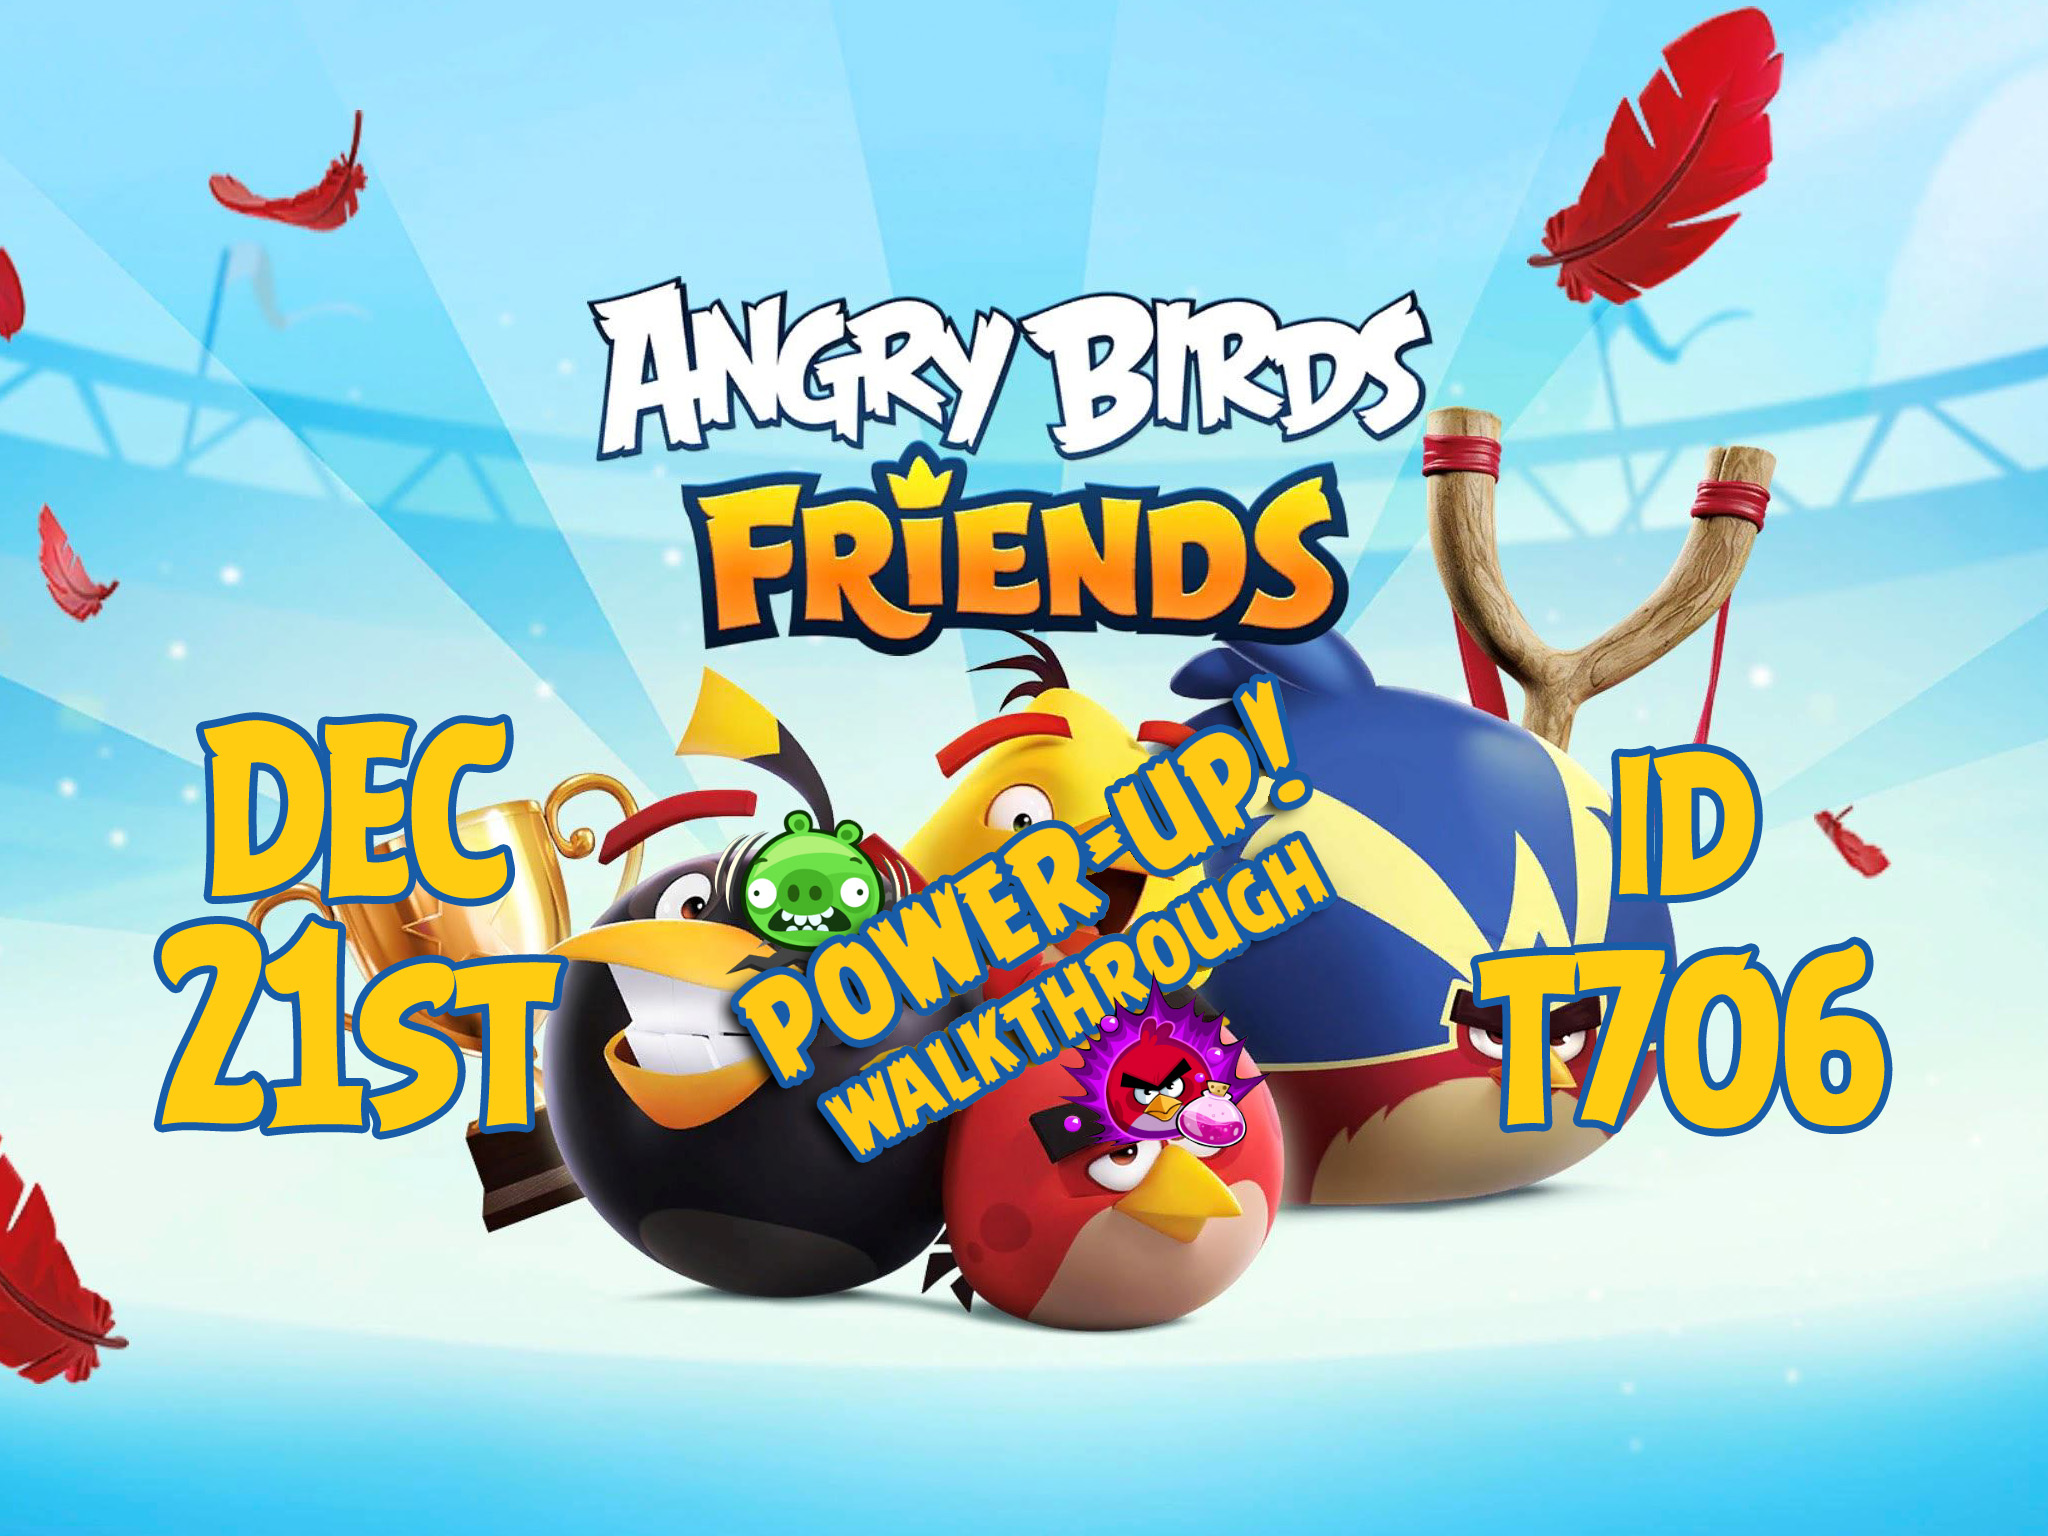 Angry-Birds-Friends-Tournament-T706-Feature-Image-PU